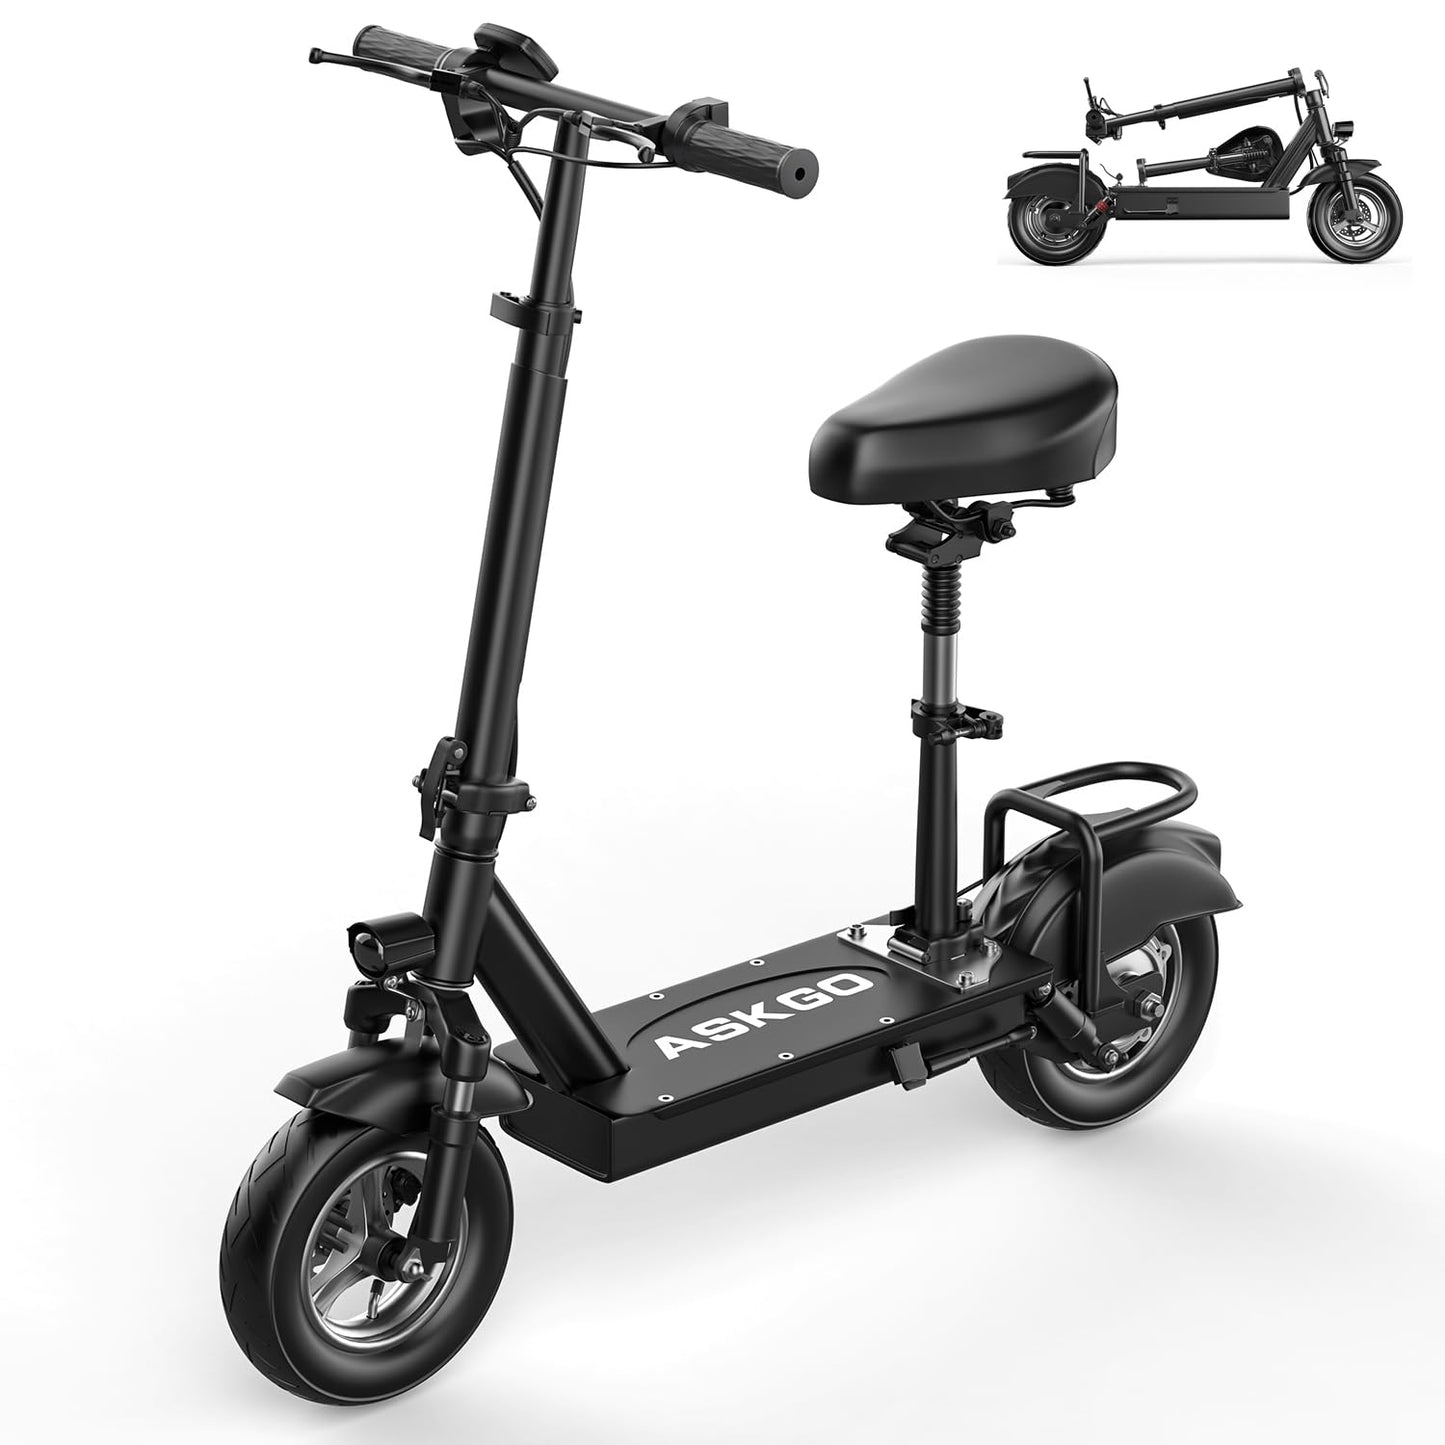 T10 500W Motor Folding Adults Electric Scooter w/ Seat